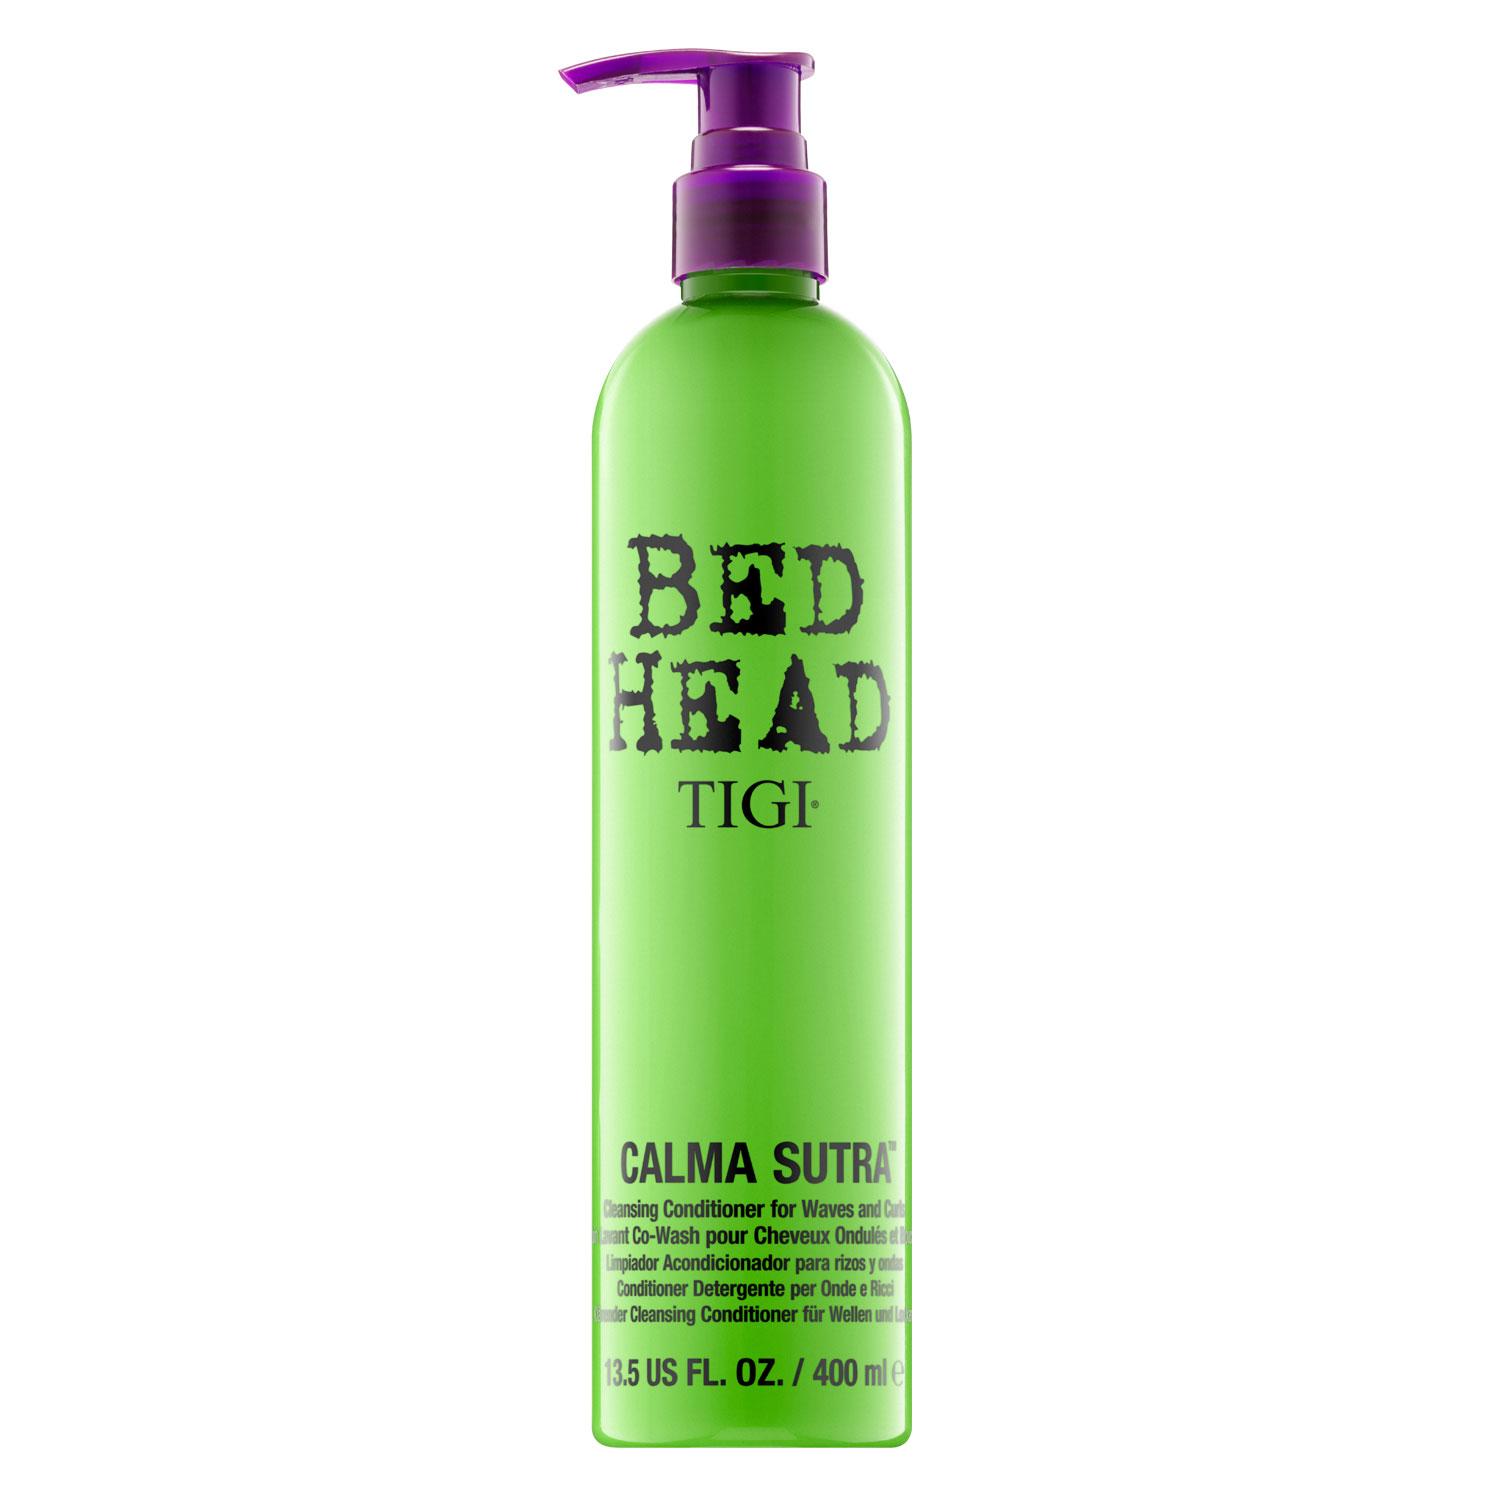 Bed Head Frizz Out - Calma Sutra